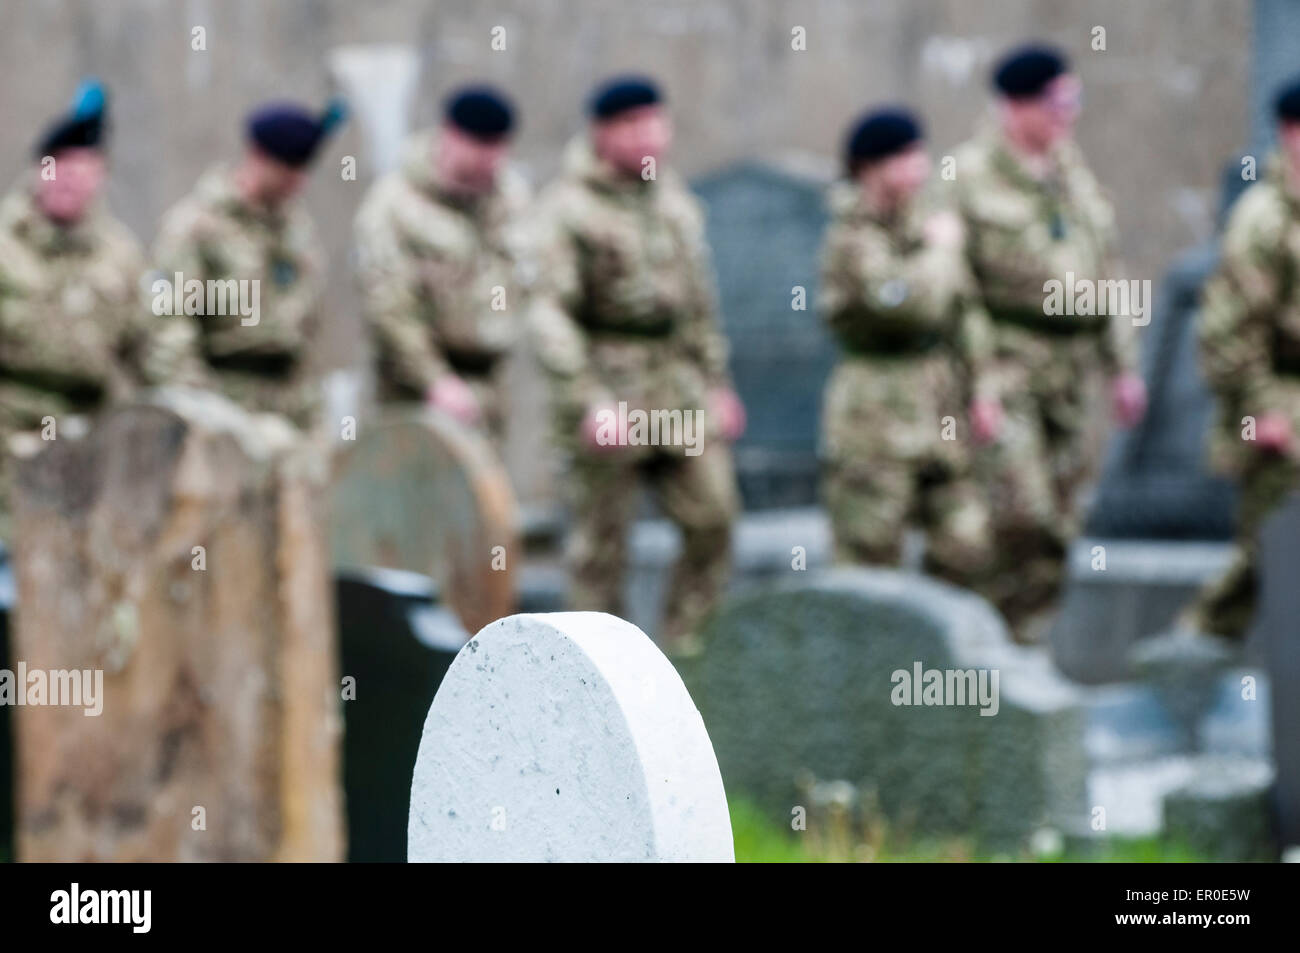 Soldiers walk among gravestones in a graveyard Stock Photo